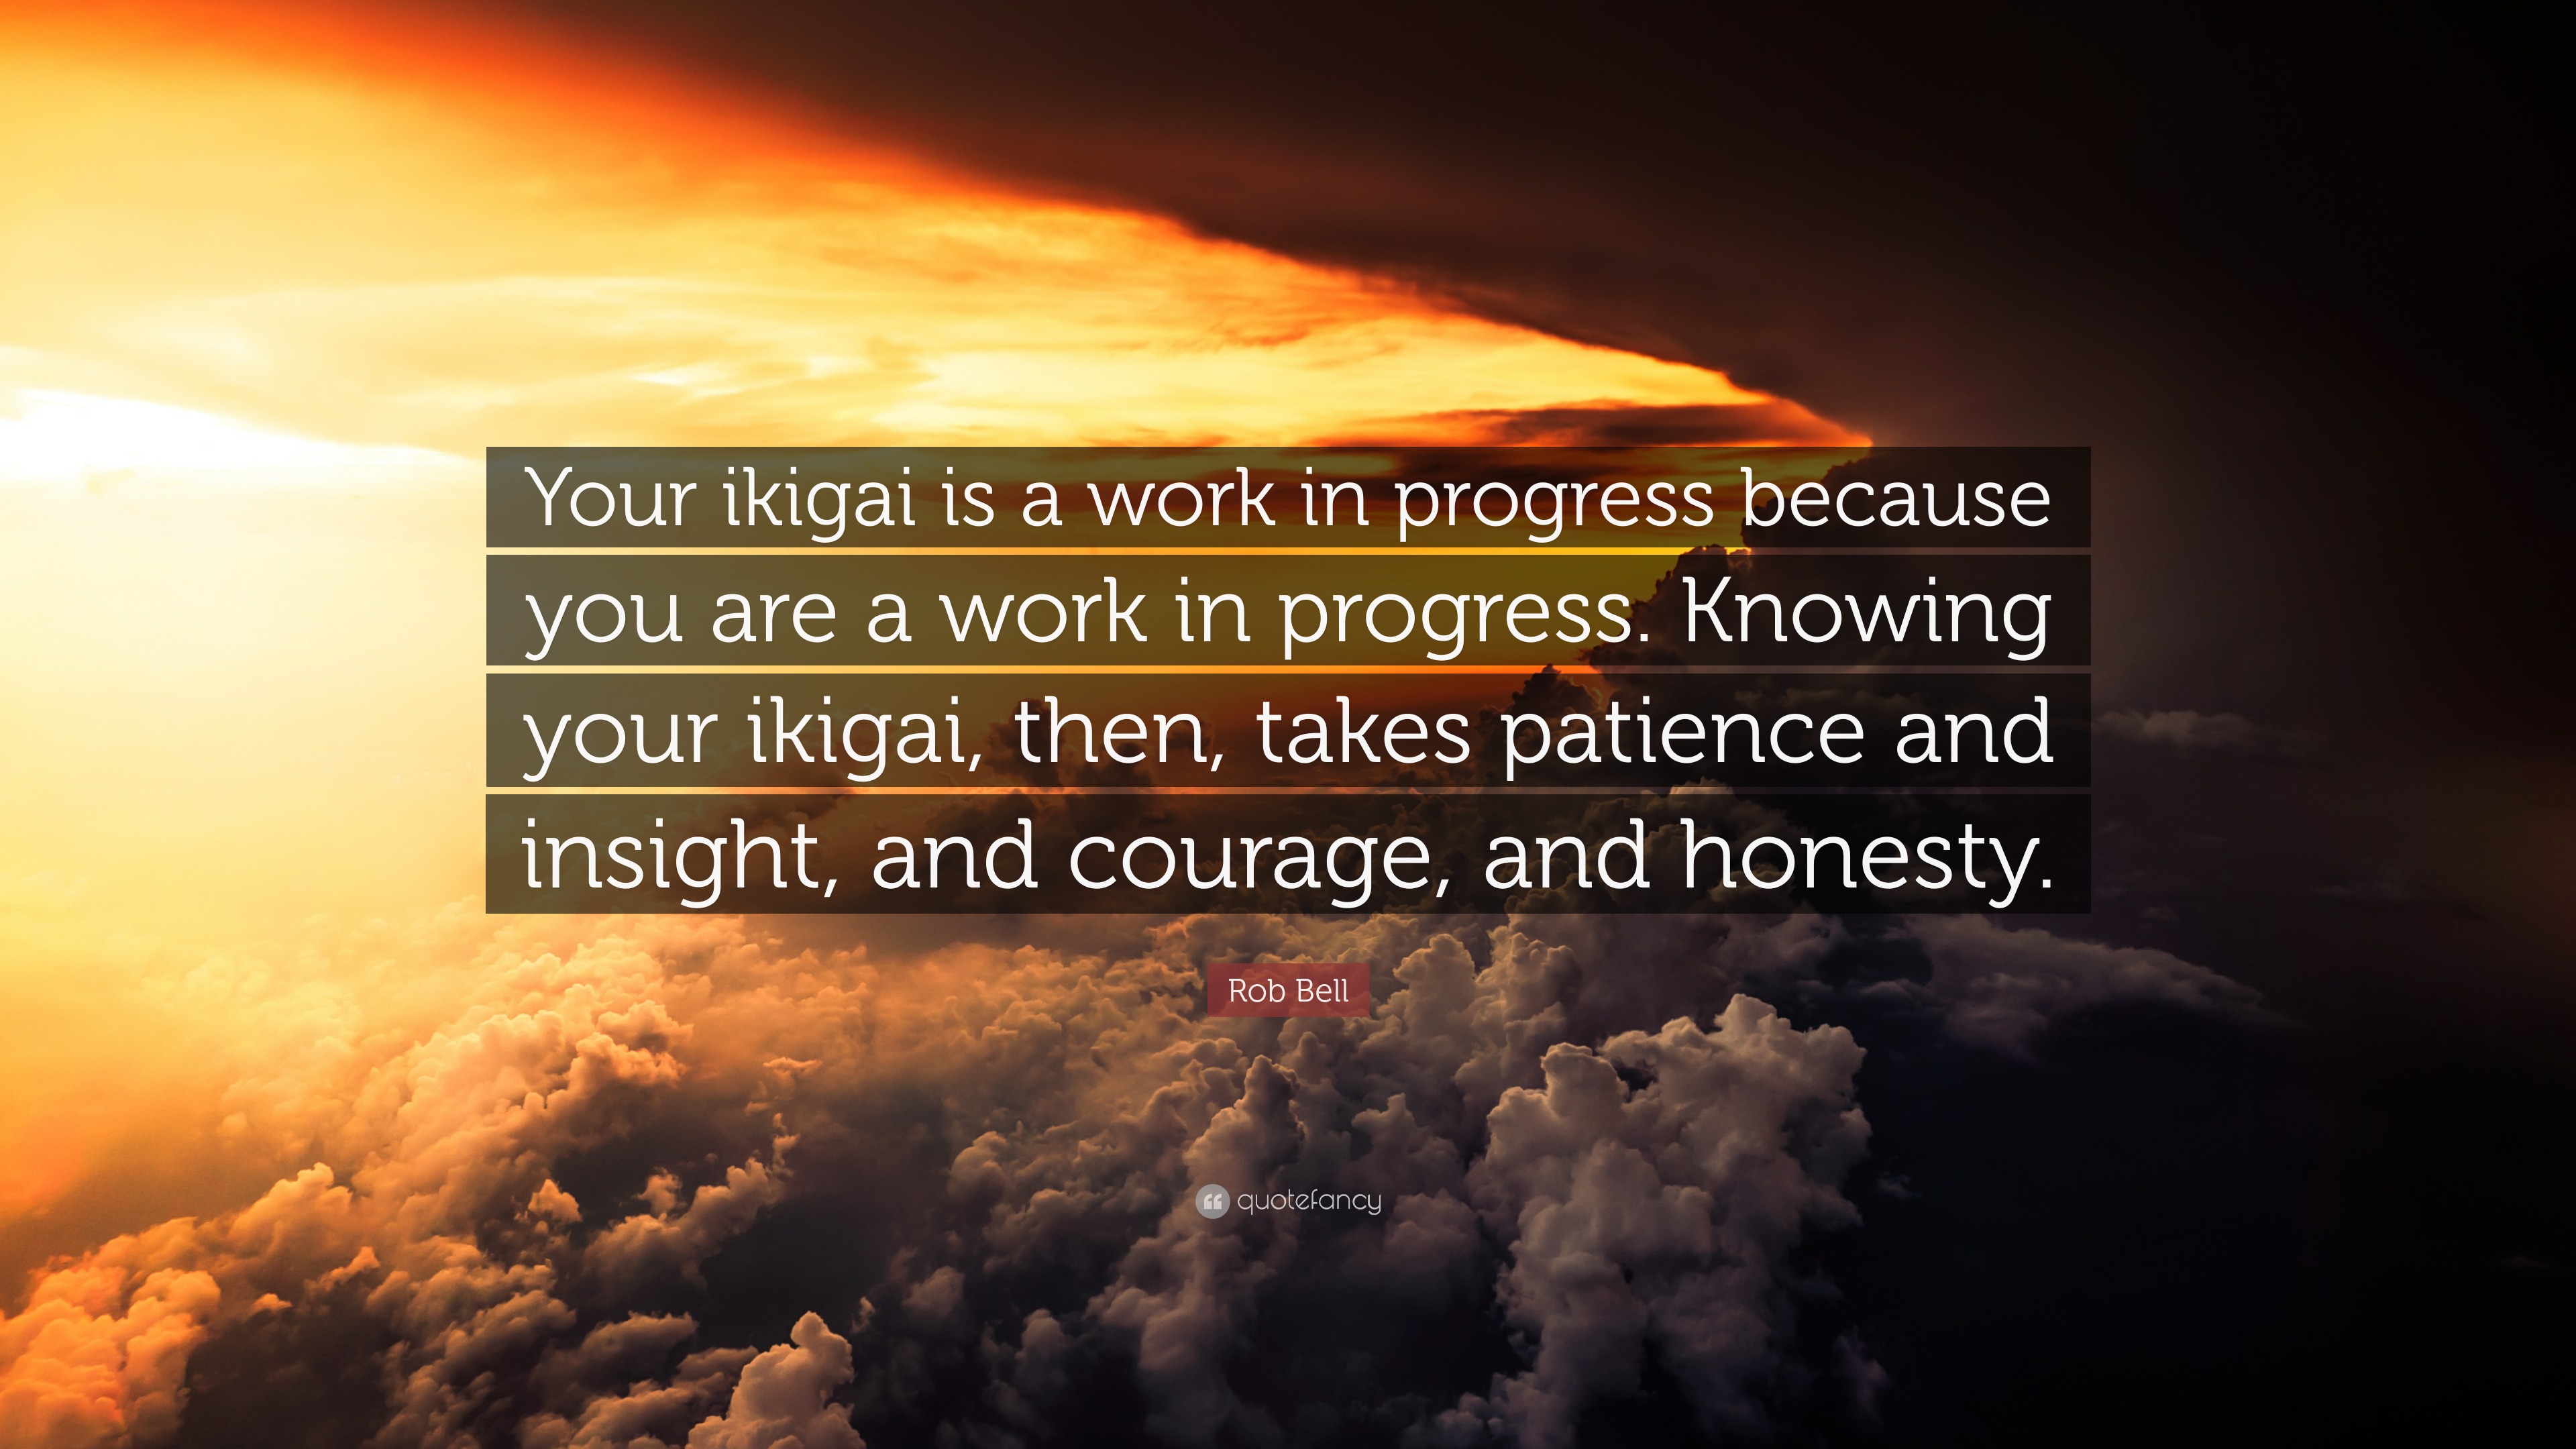 Rob Bell Quote Your Ikigai Is A Work In Progress Because You Are A Work In Progress Knowing Your Ikigai Then Takes Patience And Insi